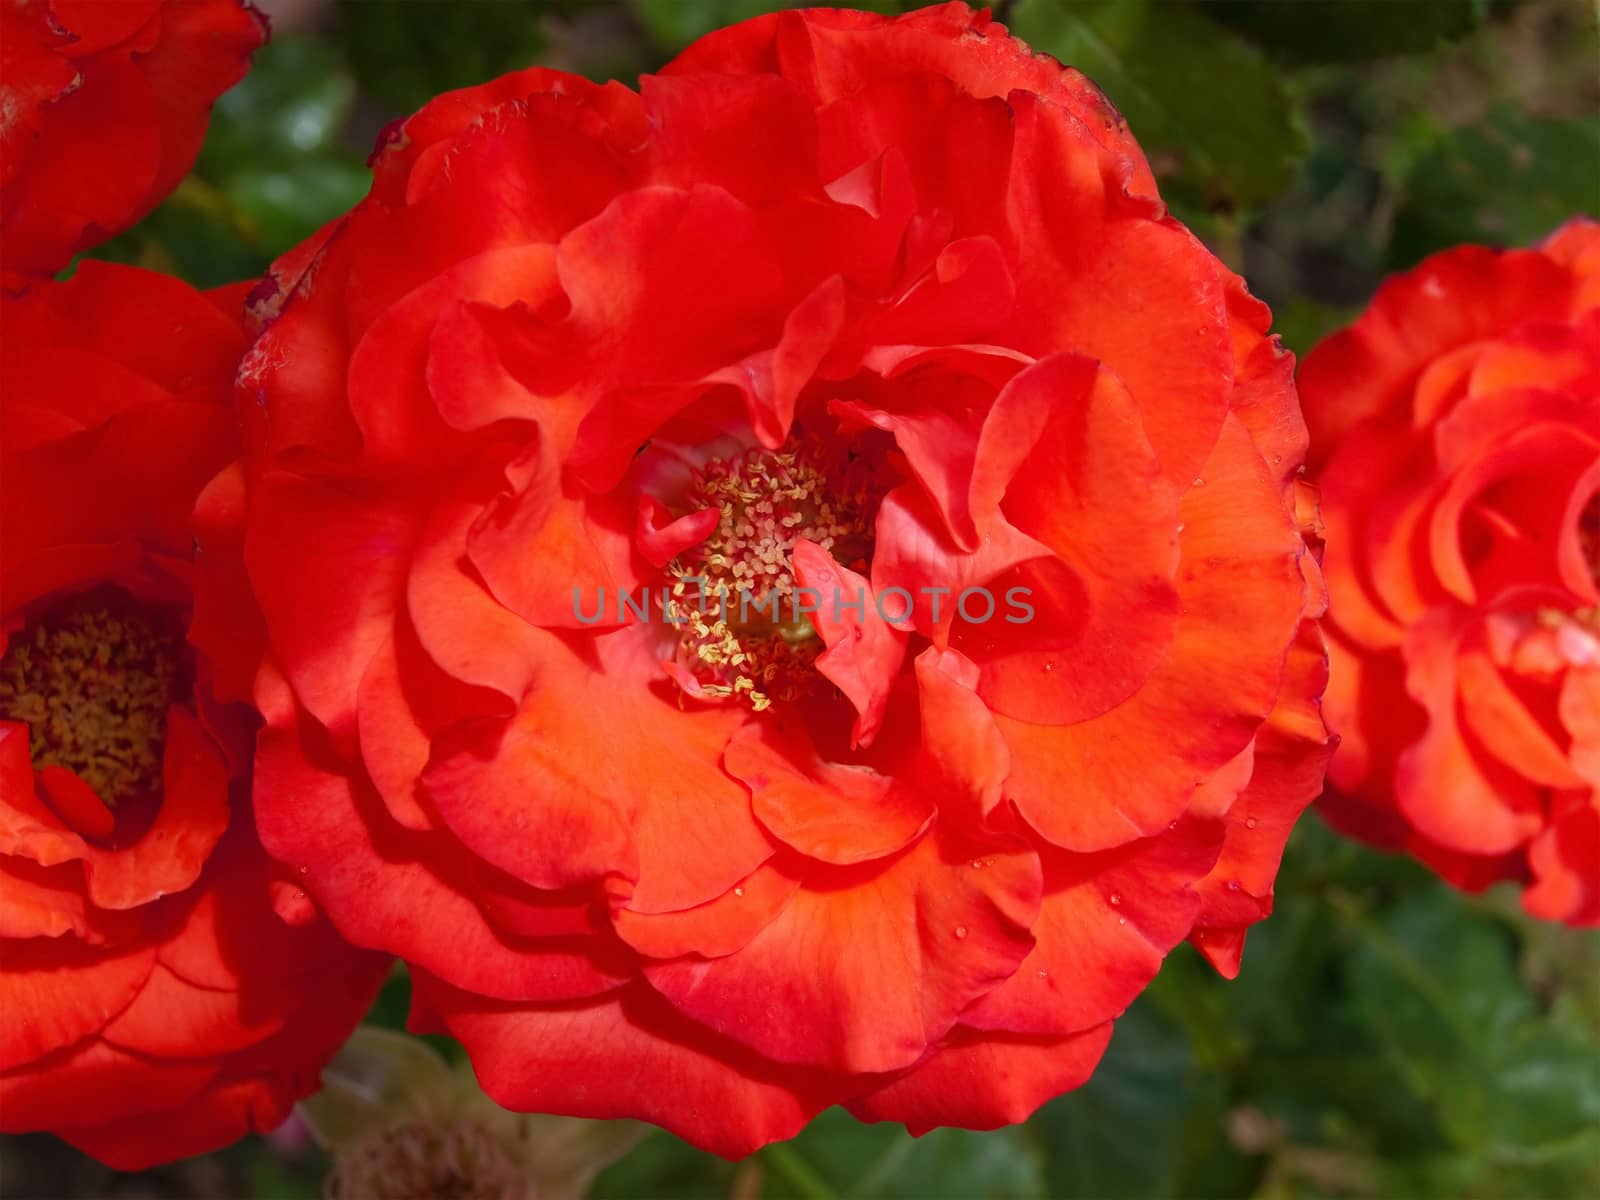 Close-up of the inside of a red rose